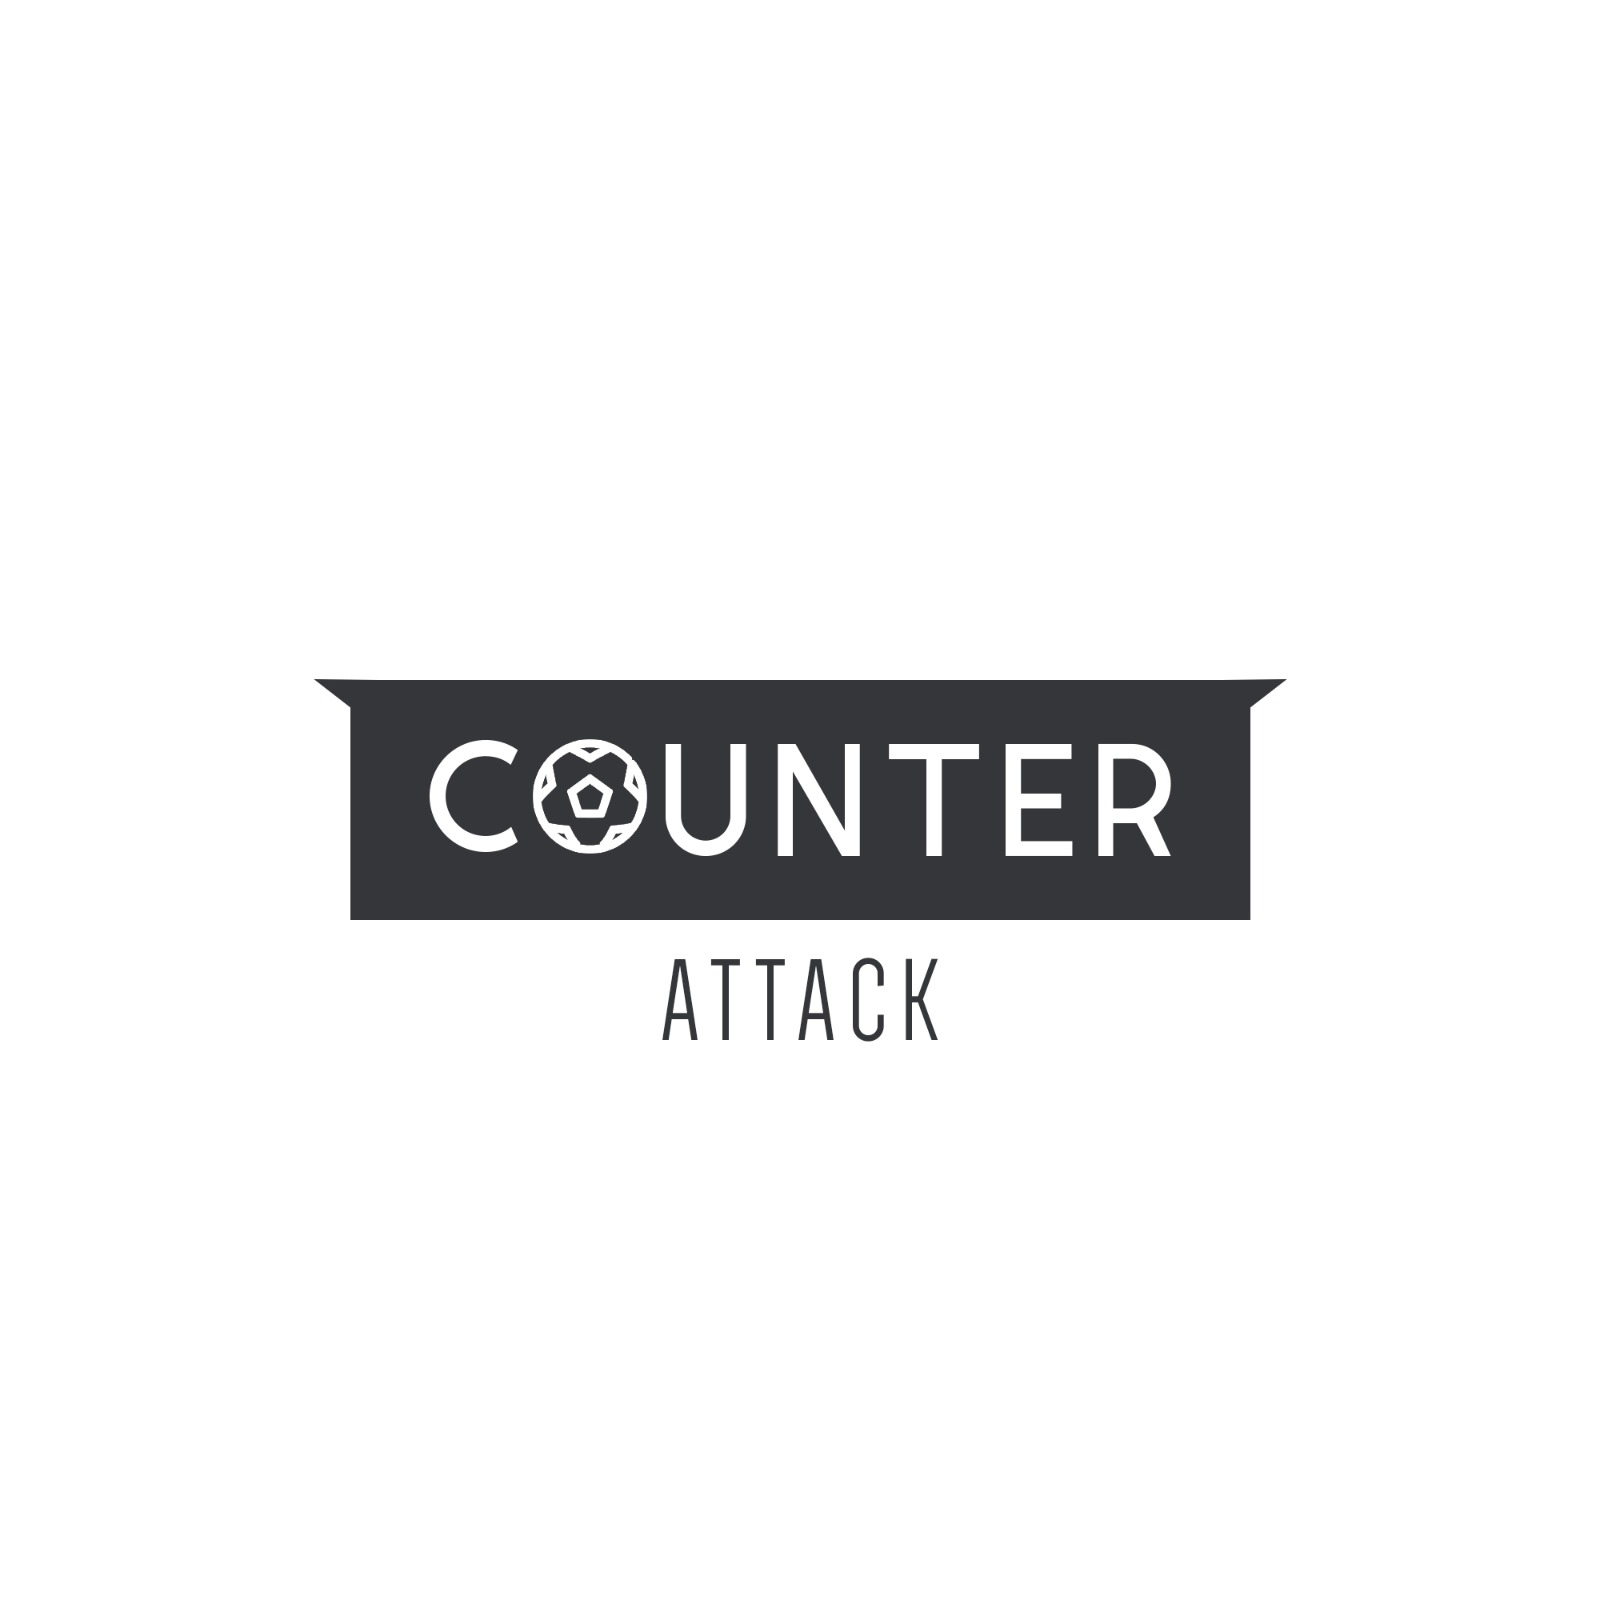 Counter Attack - Episode 87 - Leon Mann Drops In For A Chat